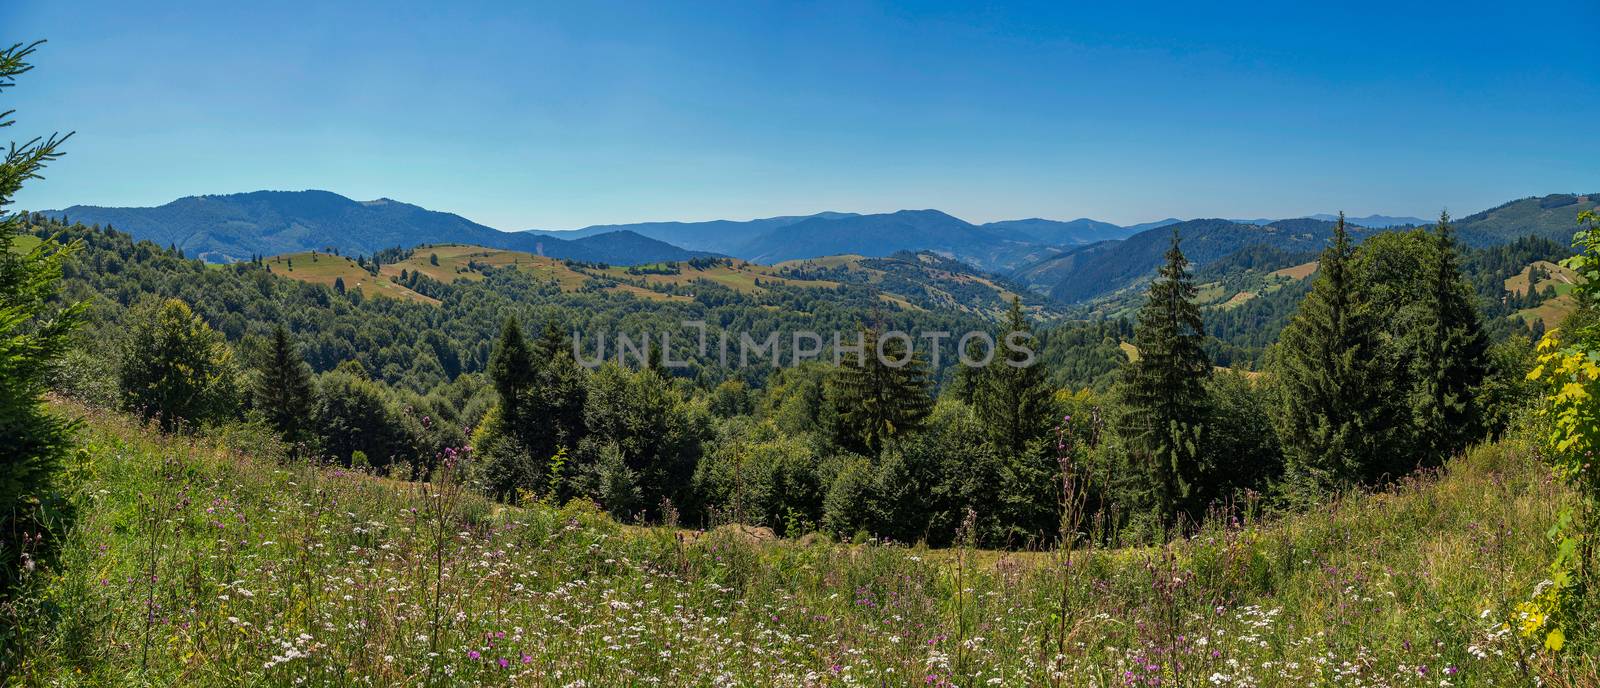 A gentle slope with lots of wonderful wildflowers against the background of high green mountain ranges